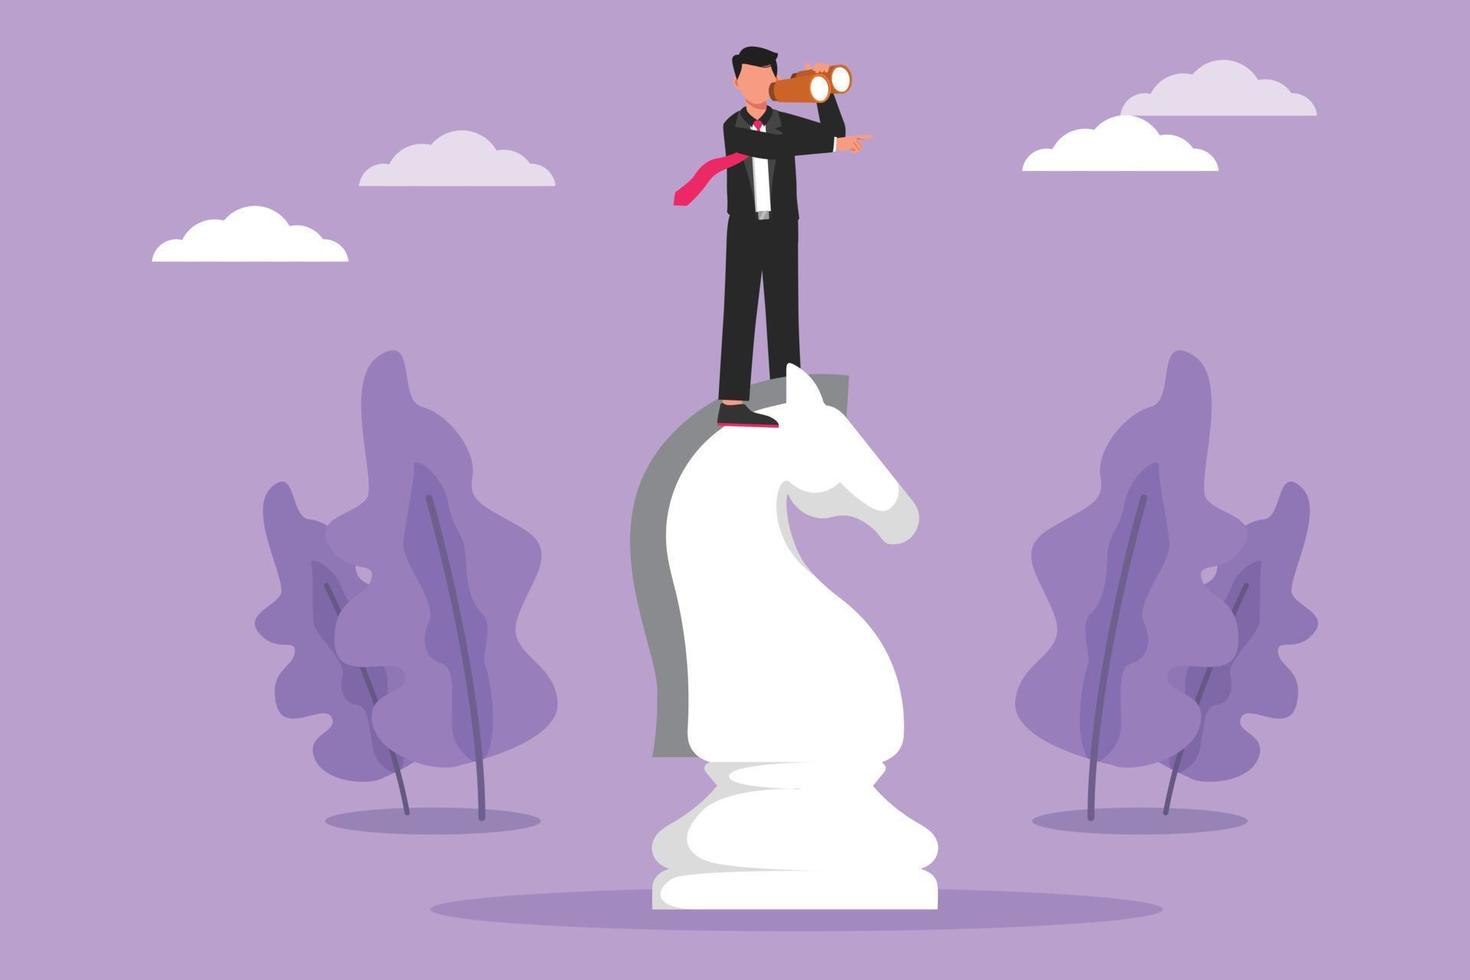 Cartoon flat style drawing innovative businessman on top of big horse chess piece using telescope looking for success, goals opportunities, future business trends. Graphic design vector illustration